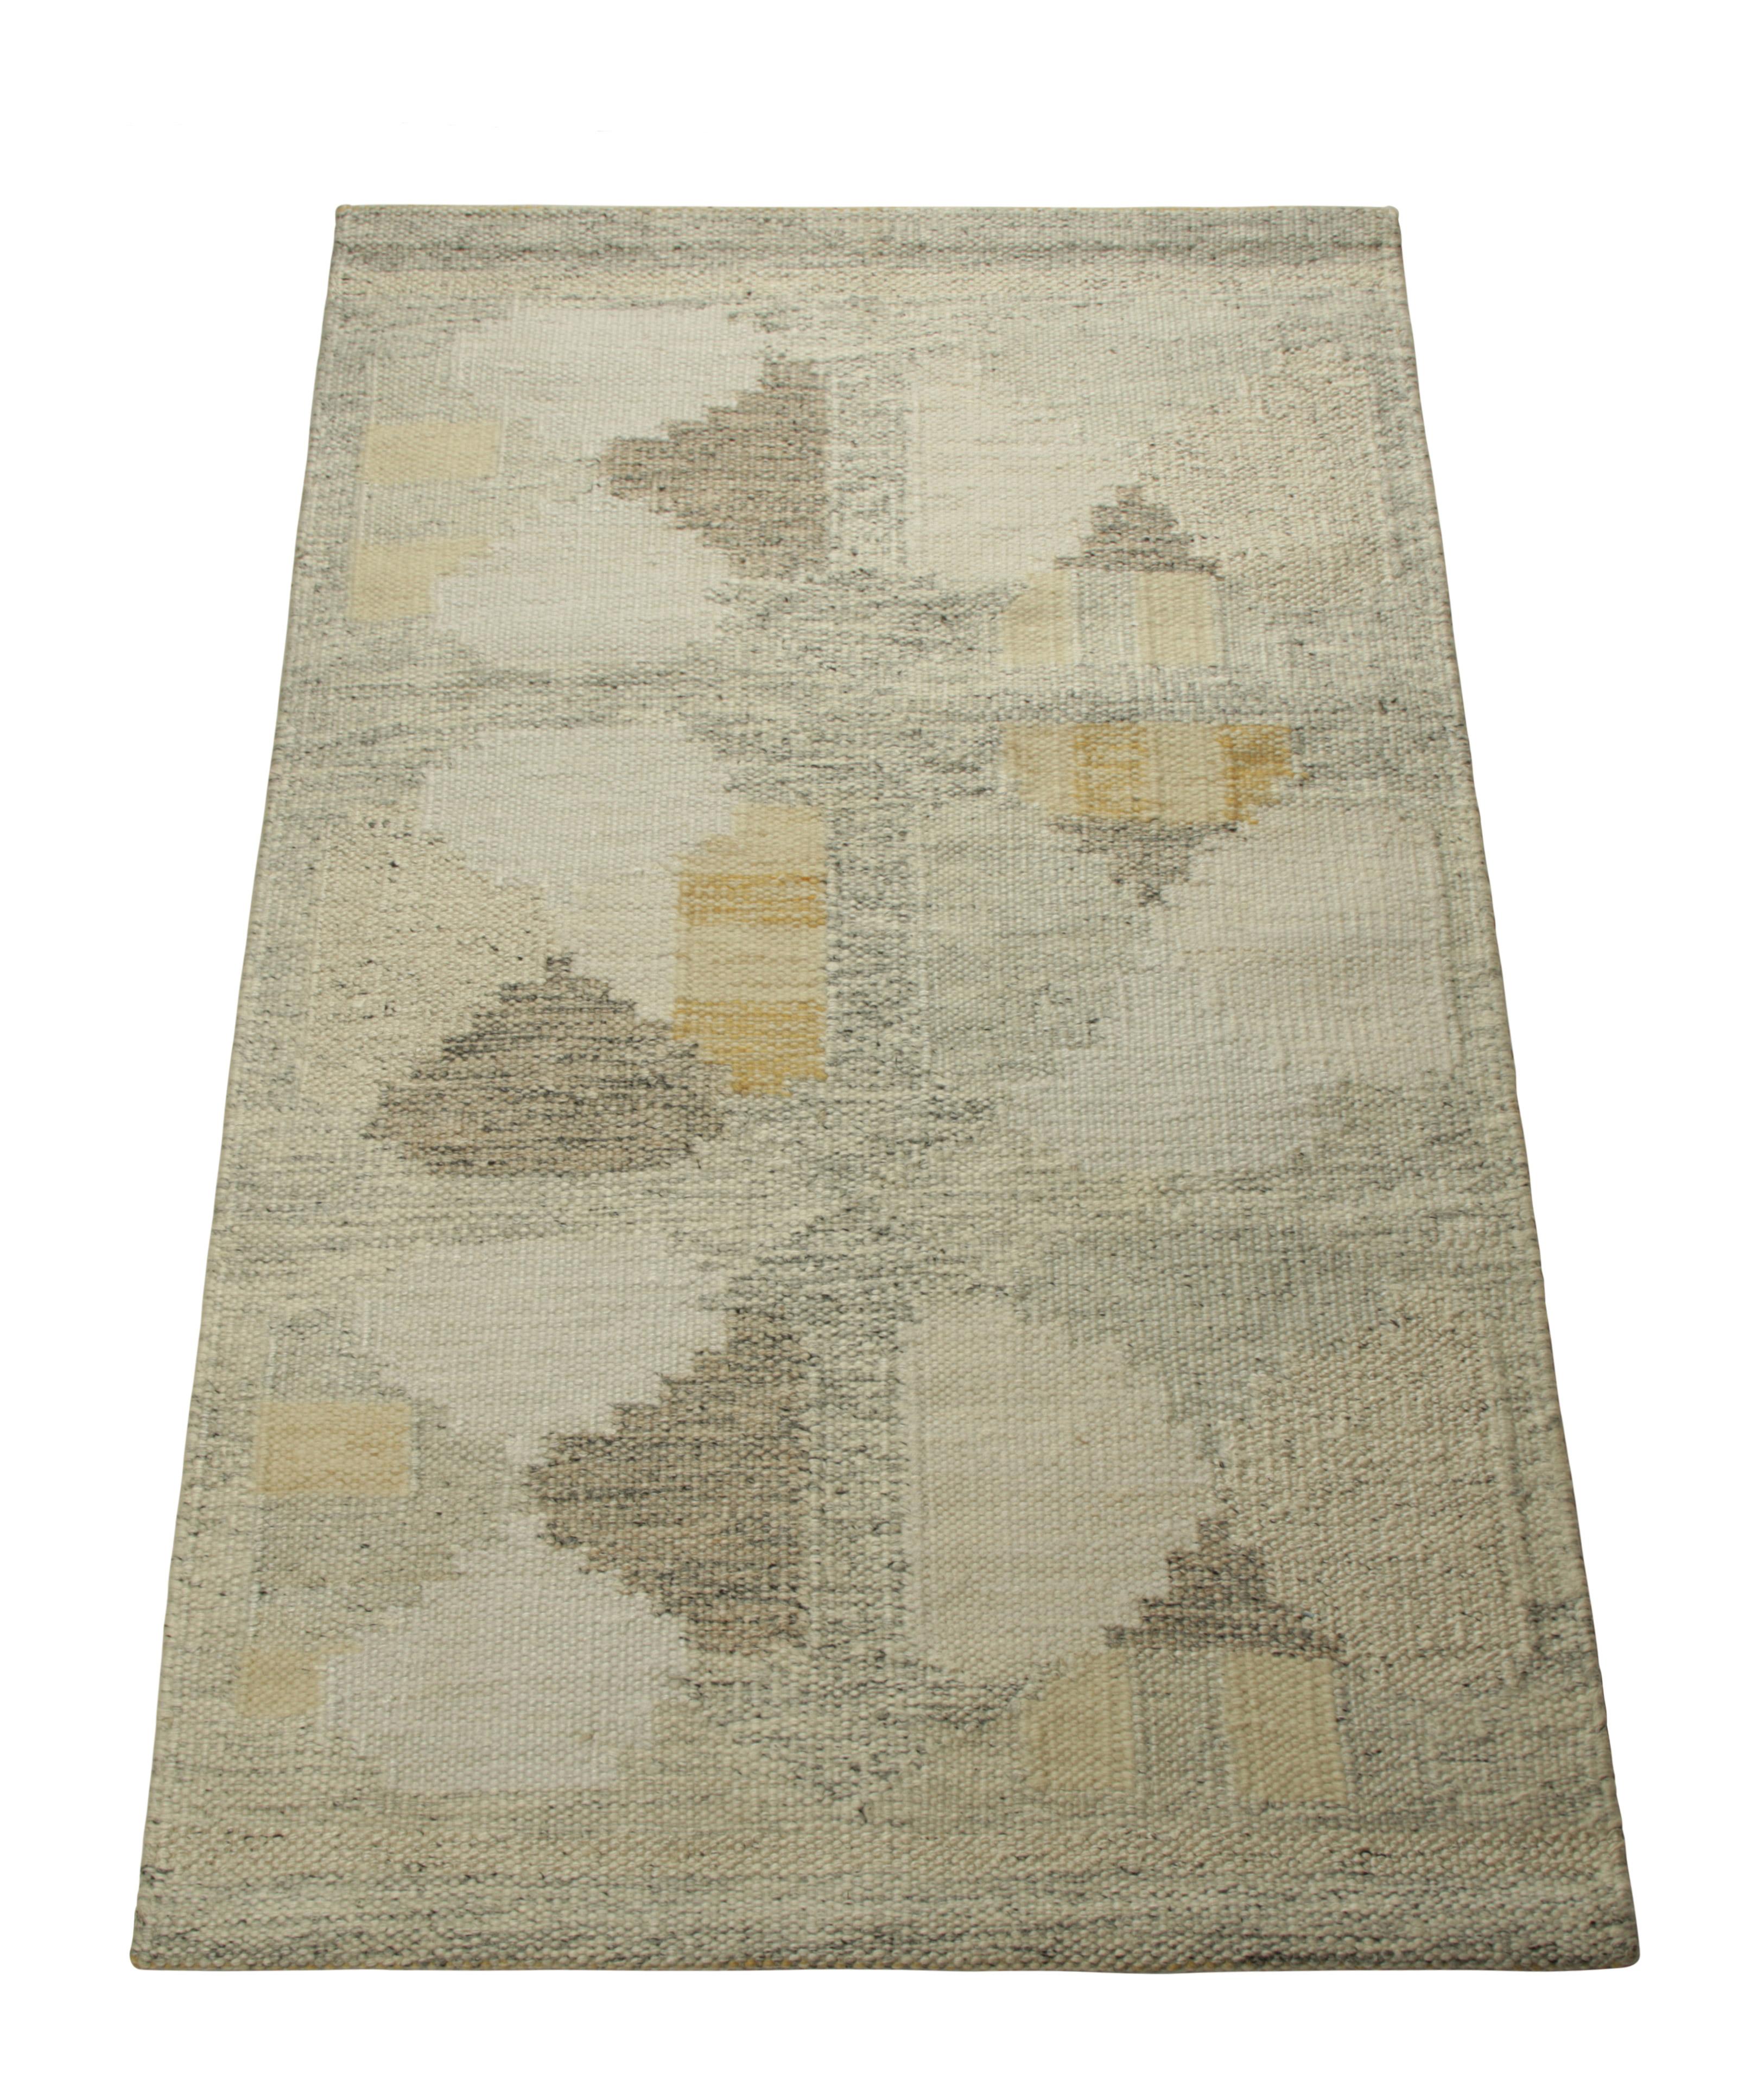 Indian Rug & Kilim’s Scandinavian Style Rug in Blue and Beige, with Geometric Patterns For Sale